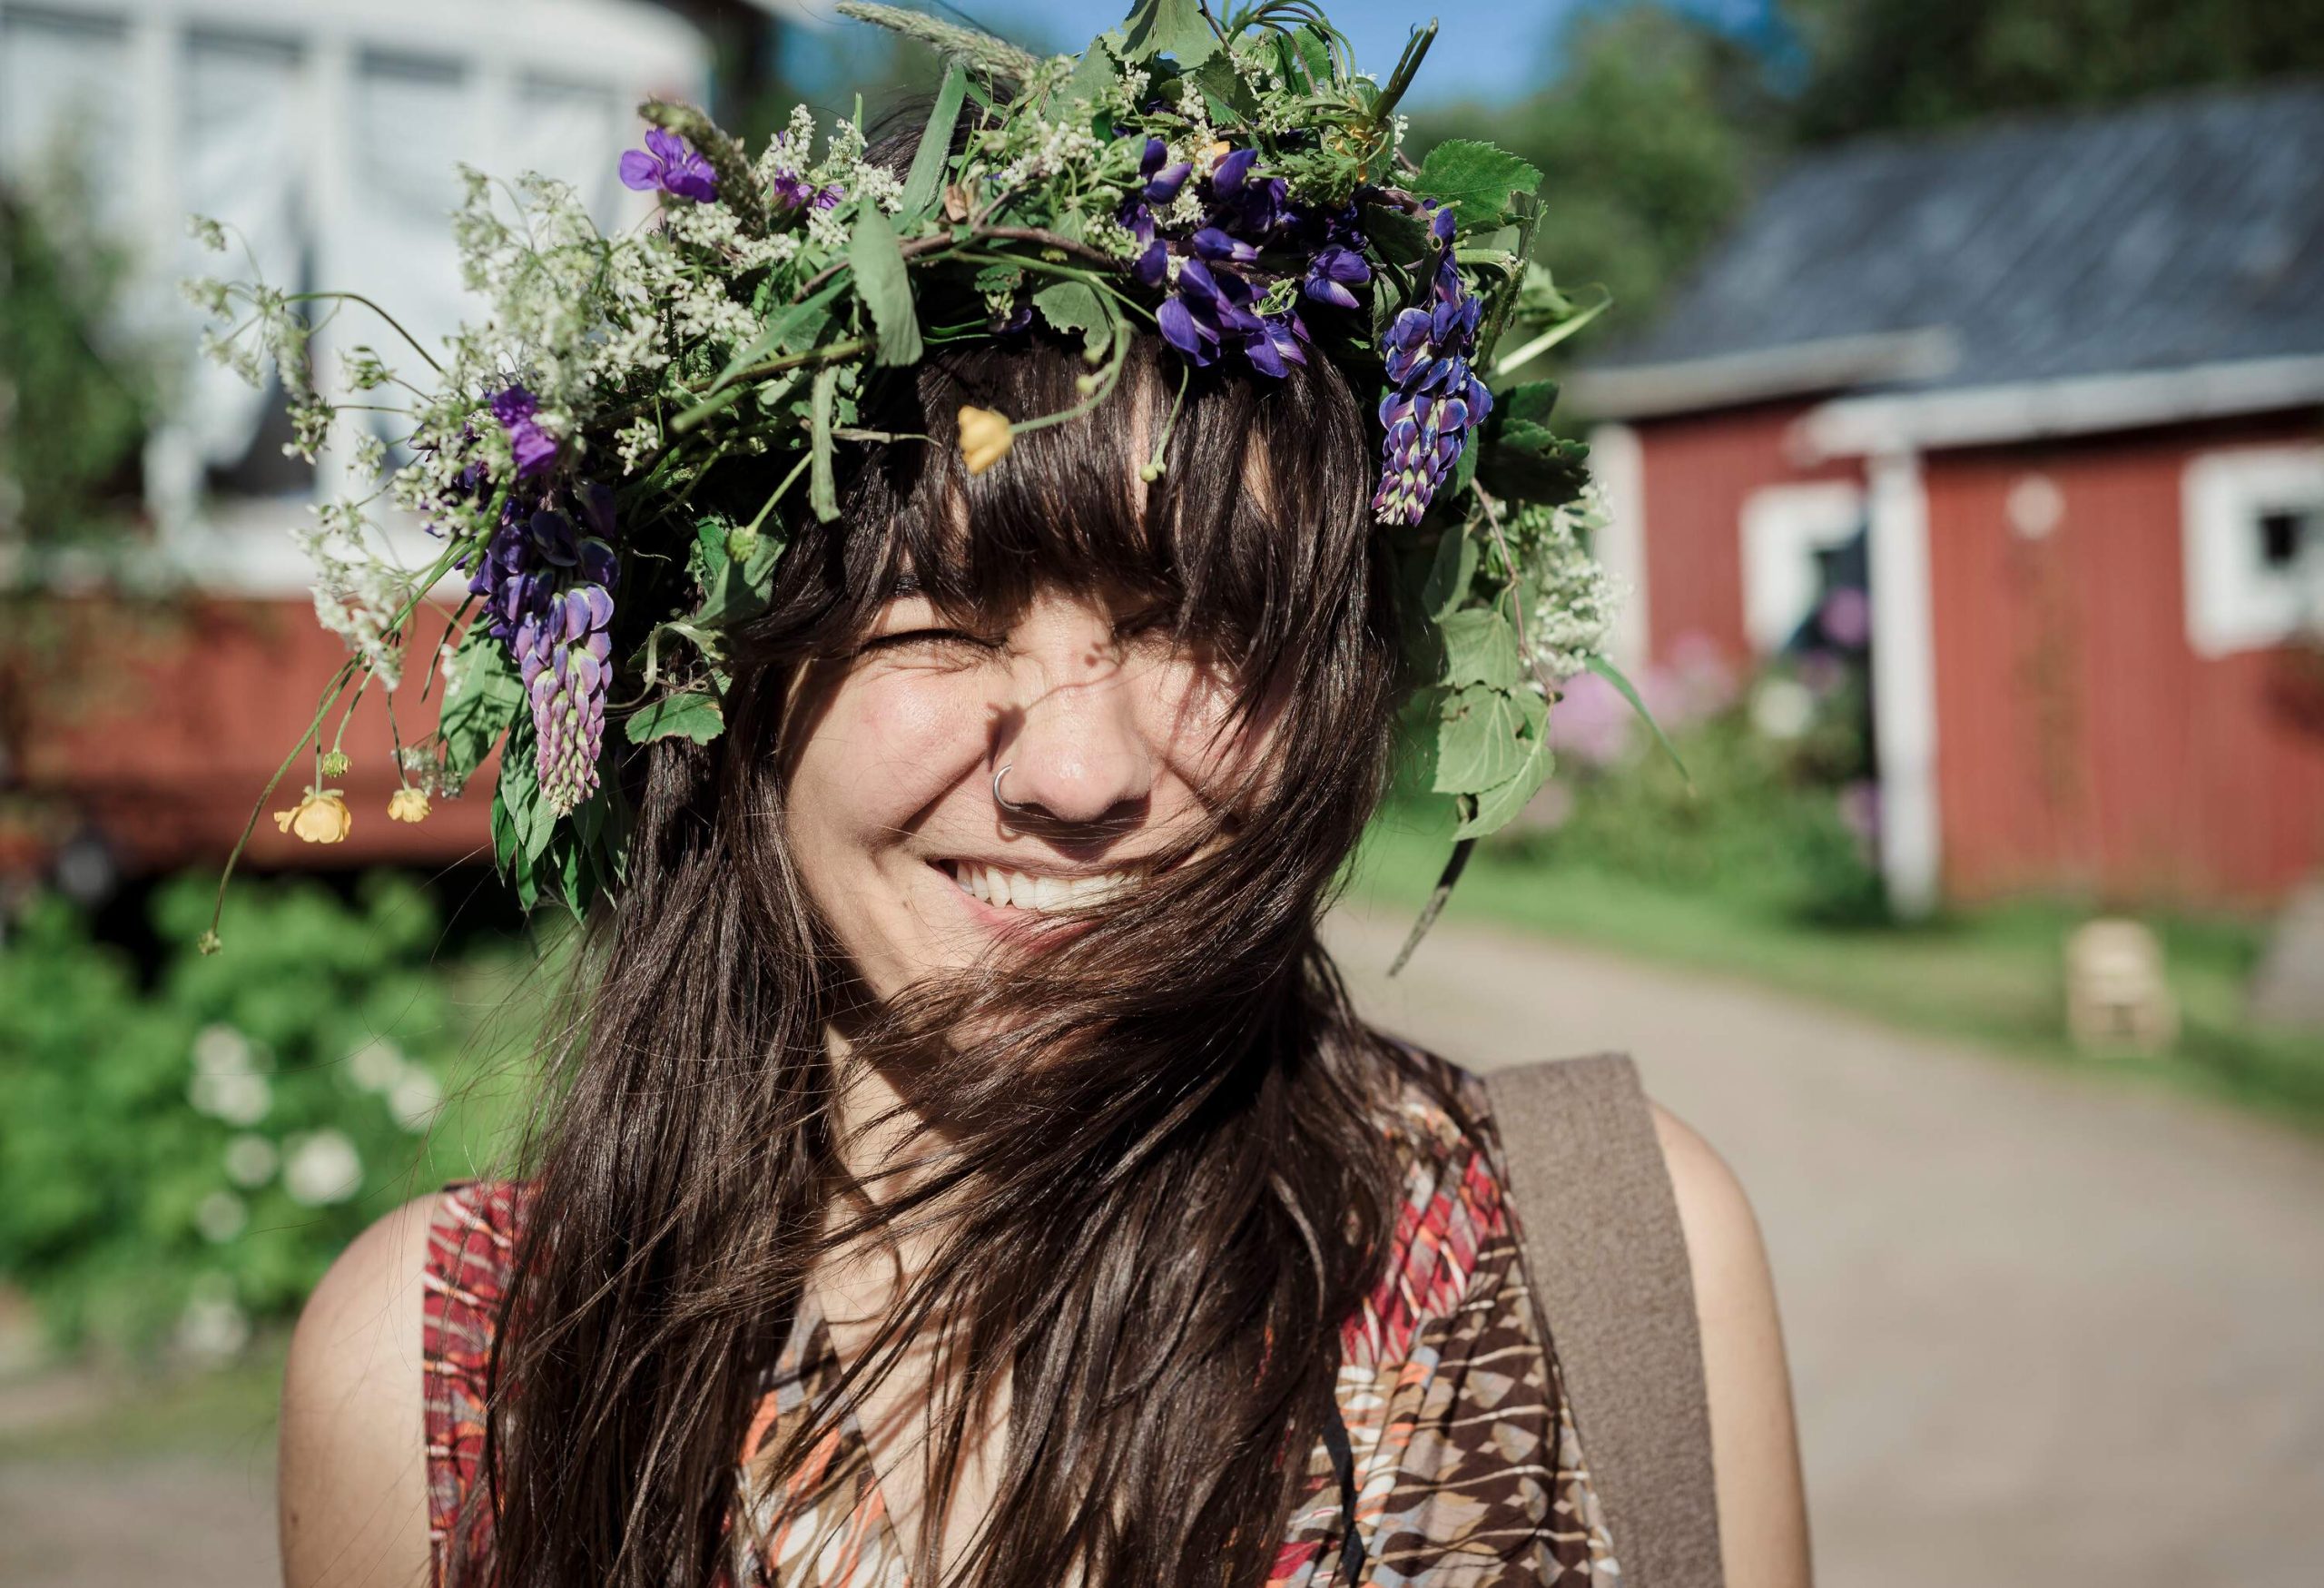 A long-haired, smiling young lady wears a floral wreath with her hair blown by the wind covering her chin.